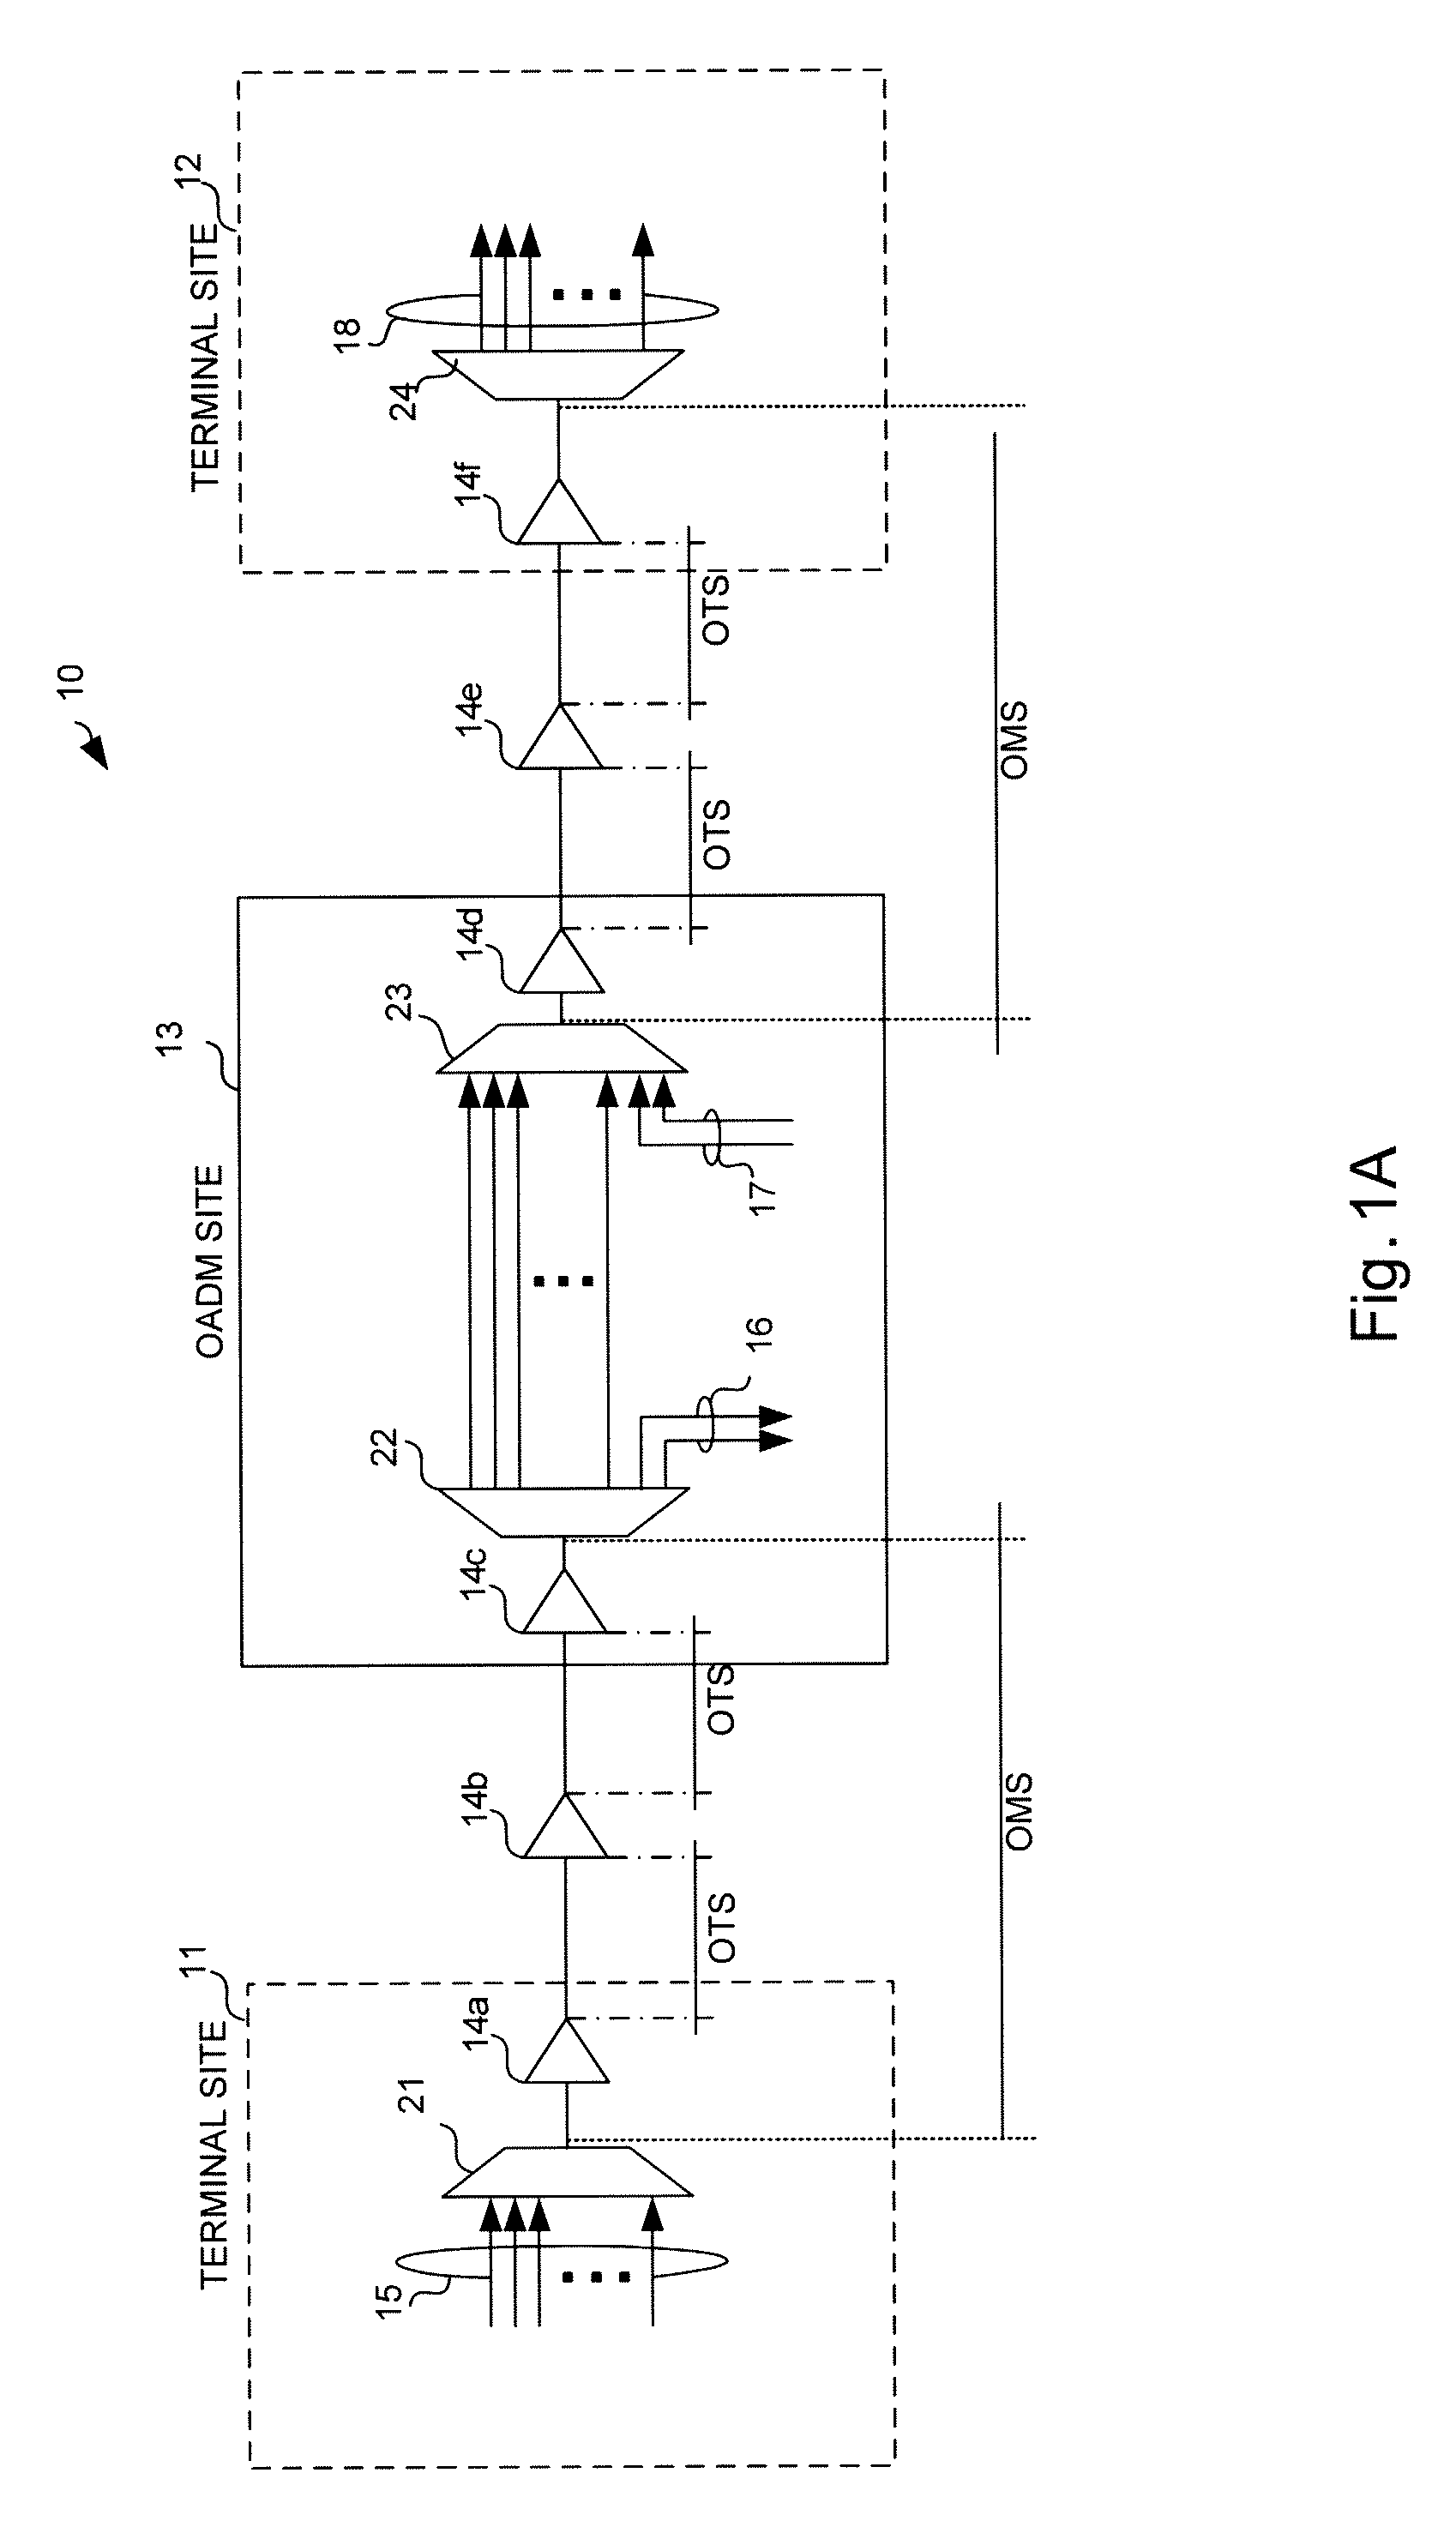 All Optical 1+1 Protection Unit Using Sub-Carrier Modulation Protocol